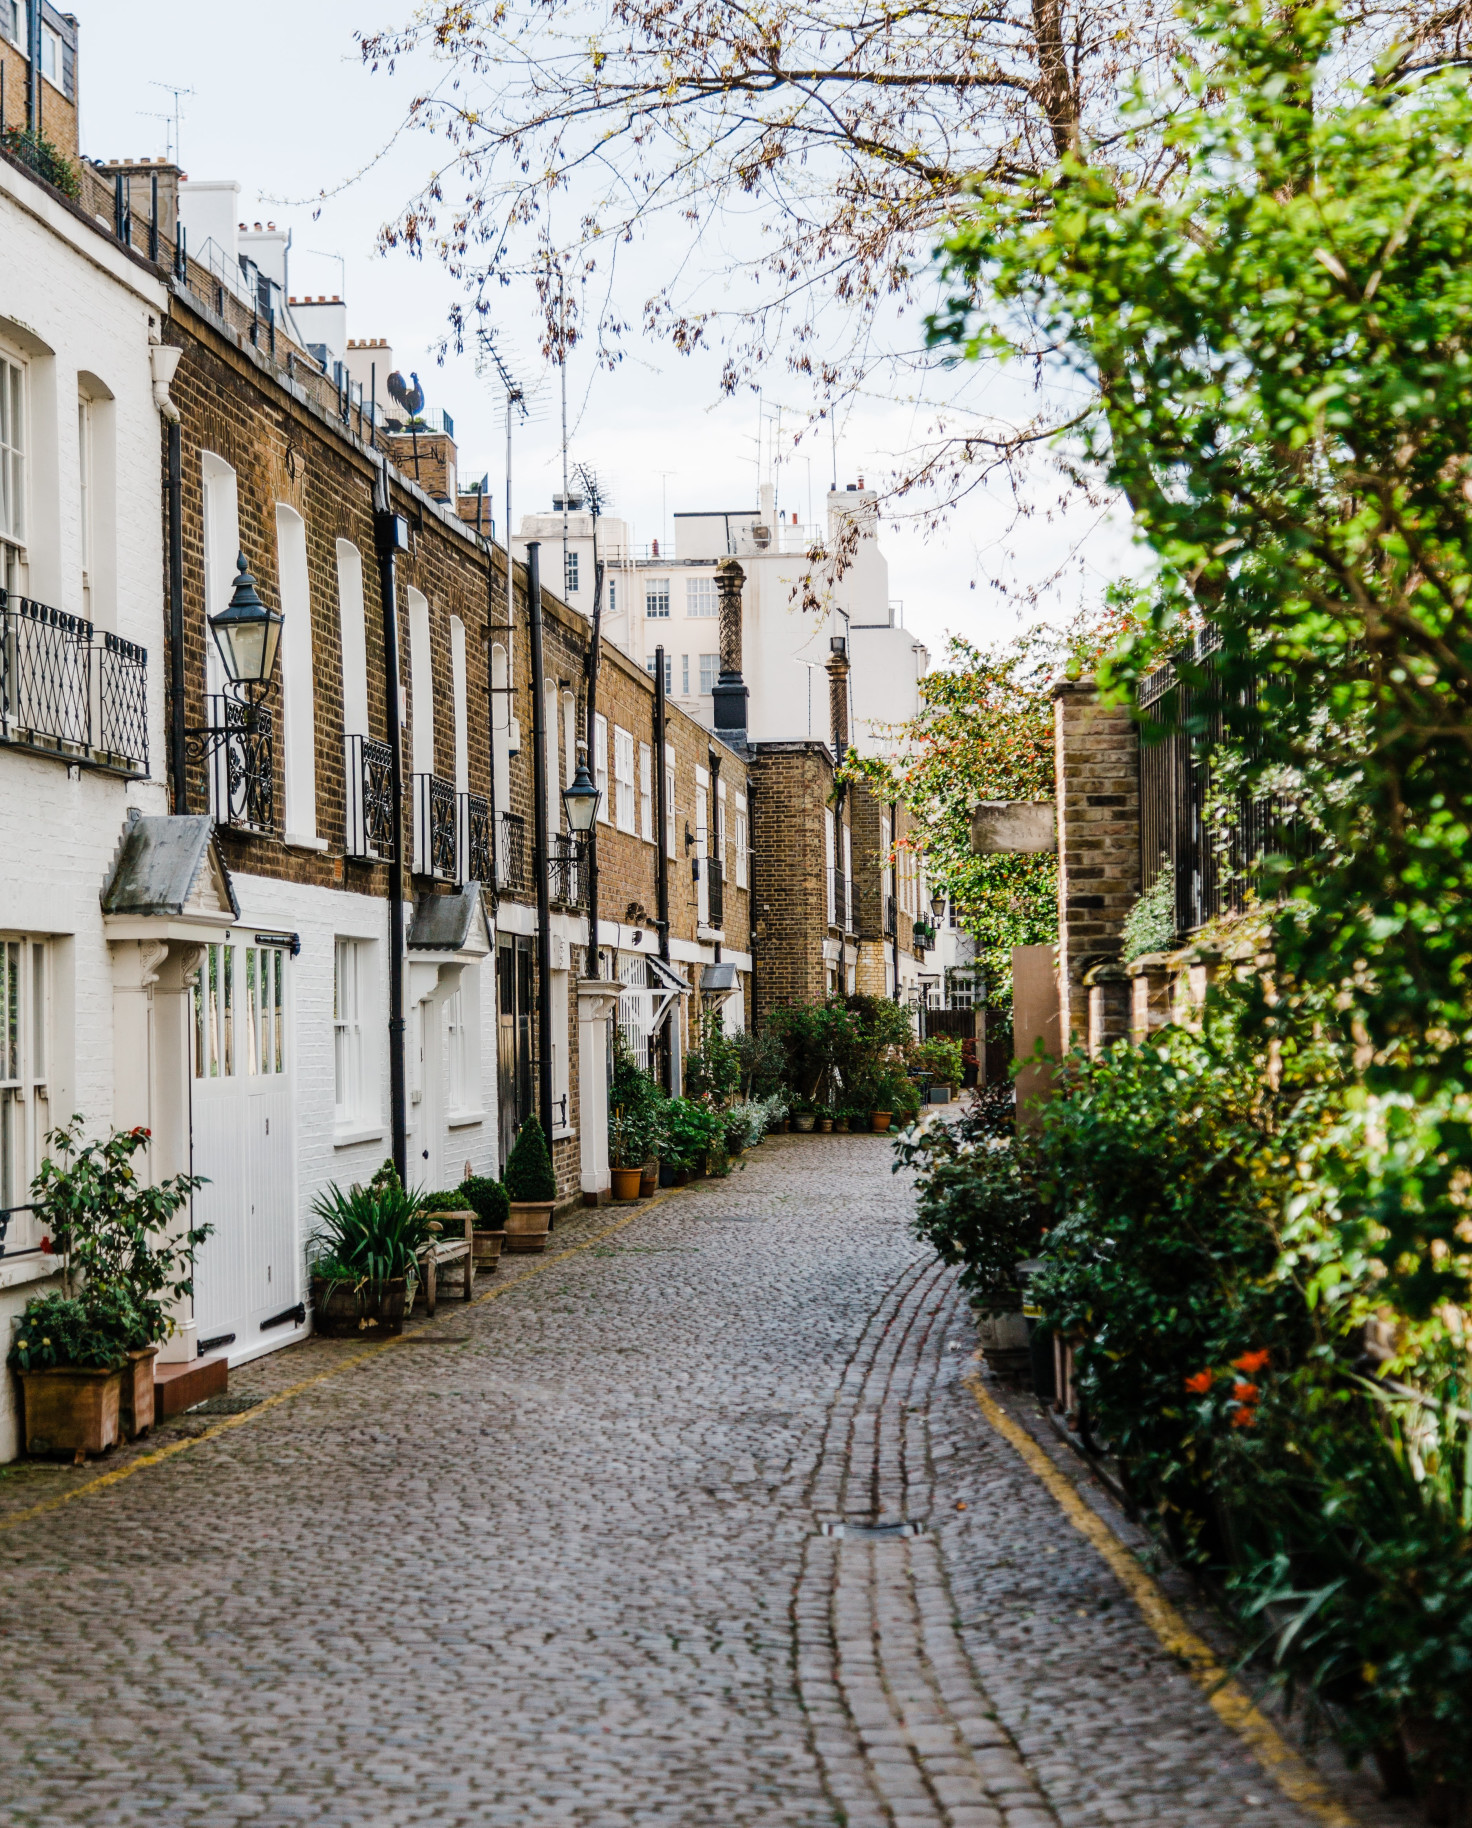 Street in London lined with townhomes and green foliage